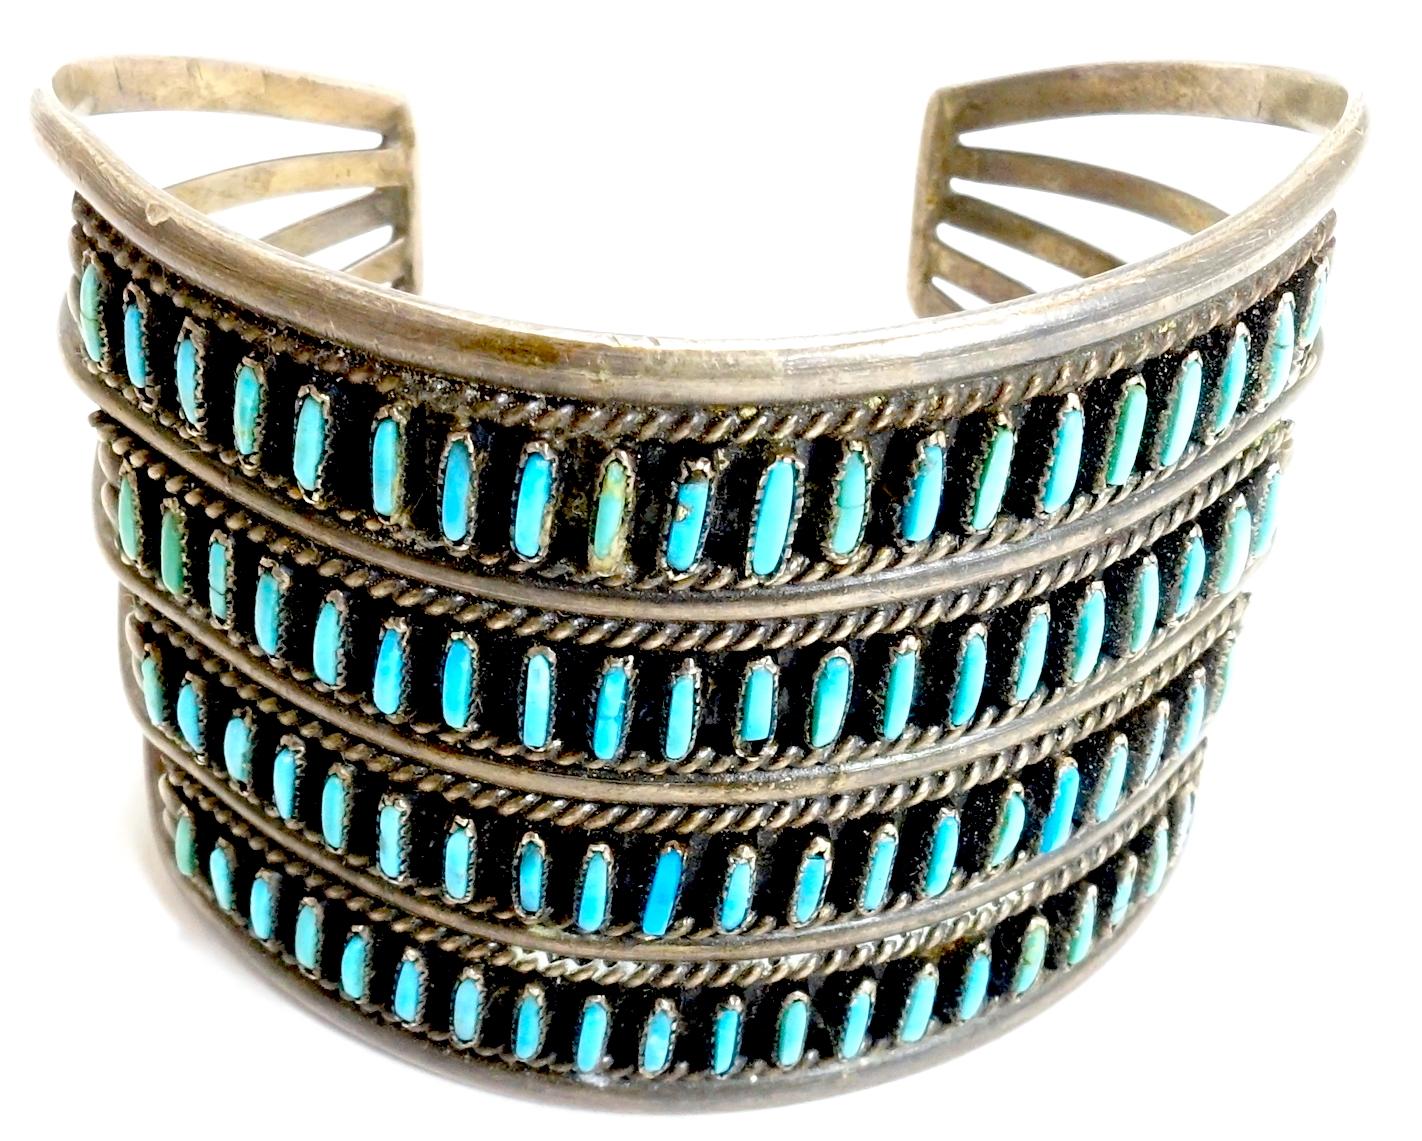 This vintage Zuni Pawn American Indian cuff bracelet features a needlepoint turquoise stone design in sterling silver.  The workmanship and detail to get matching stones to make such a design always amazes collectors.   This adjustable cuff measures